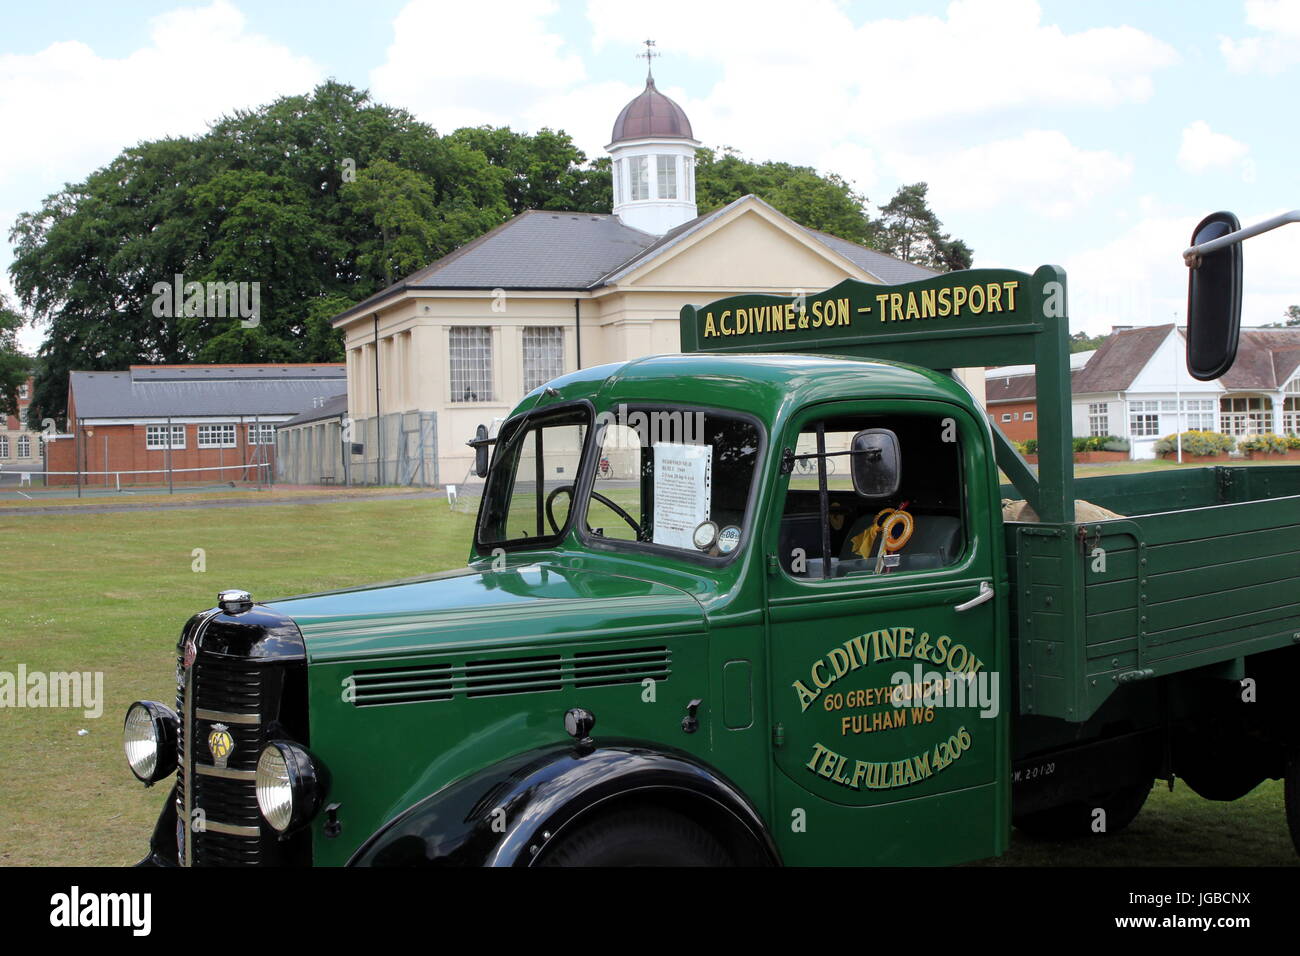 Sandhurst, UK - June 18 2017: 1949 Bedford MLD truck in the livery of A.C.Devine and Son Stock Photo